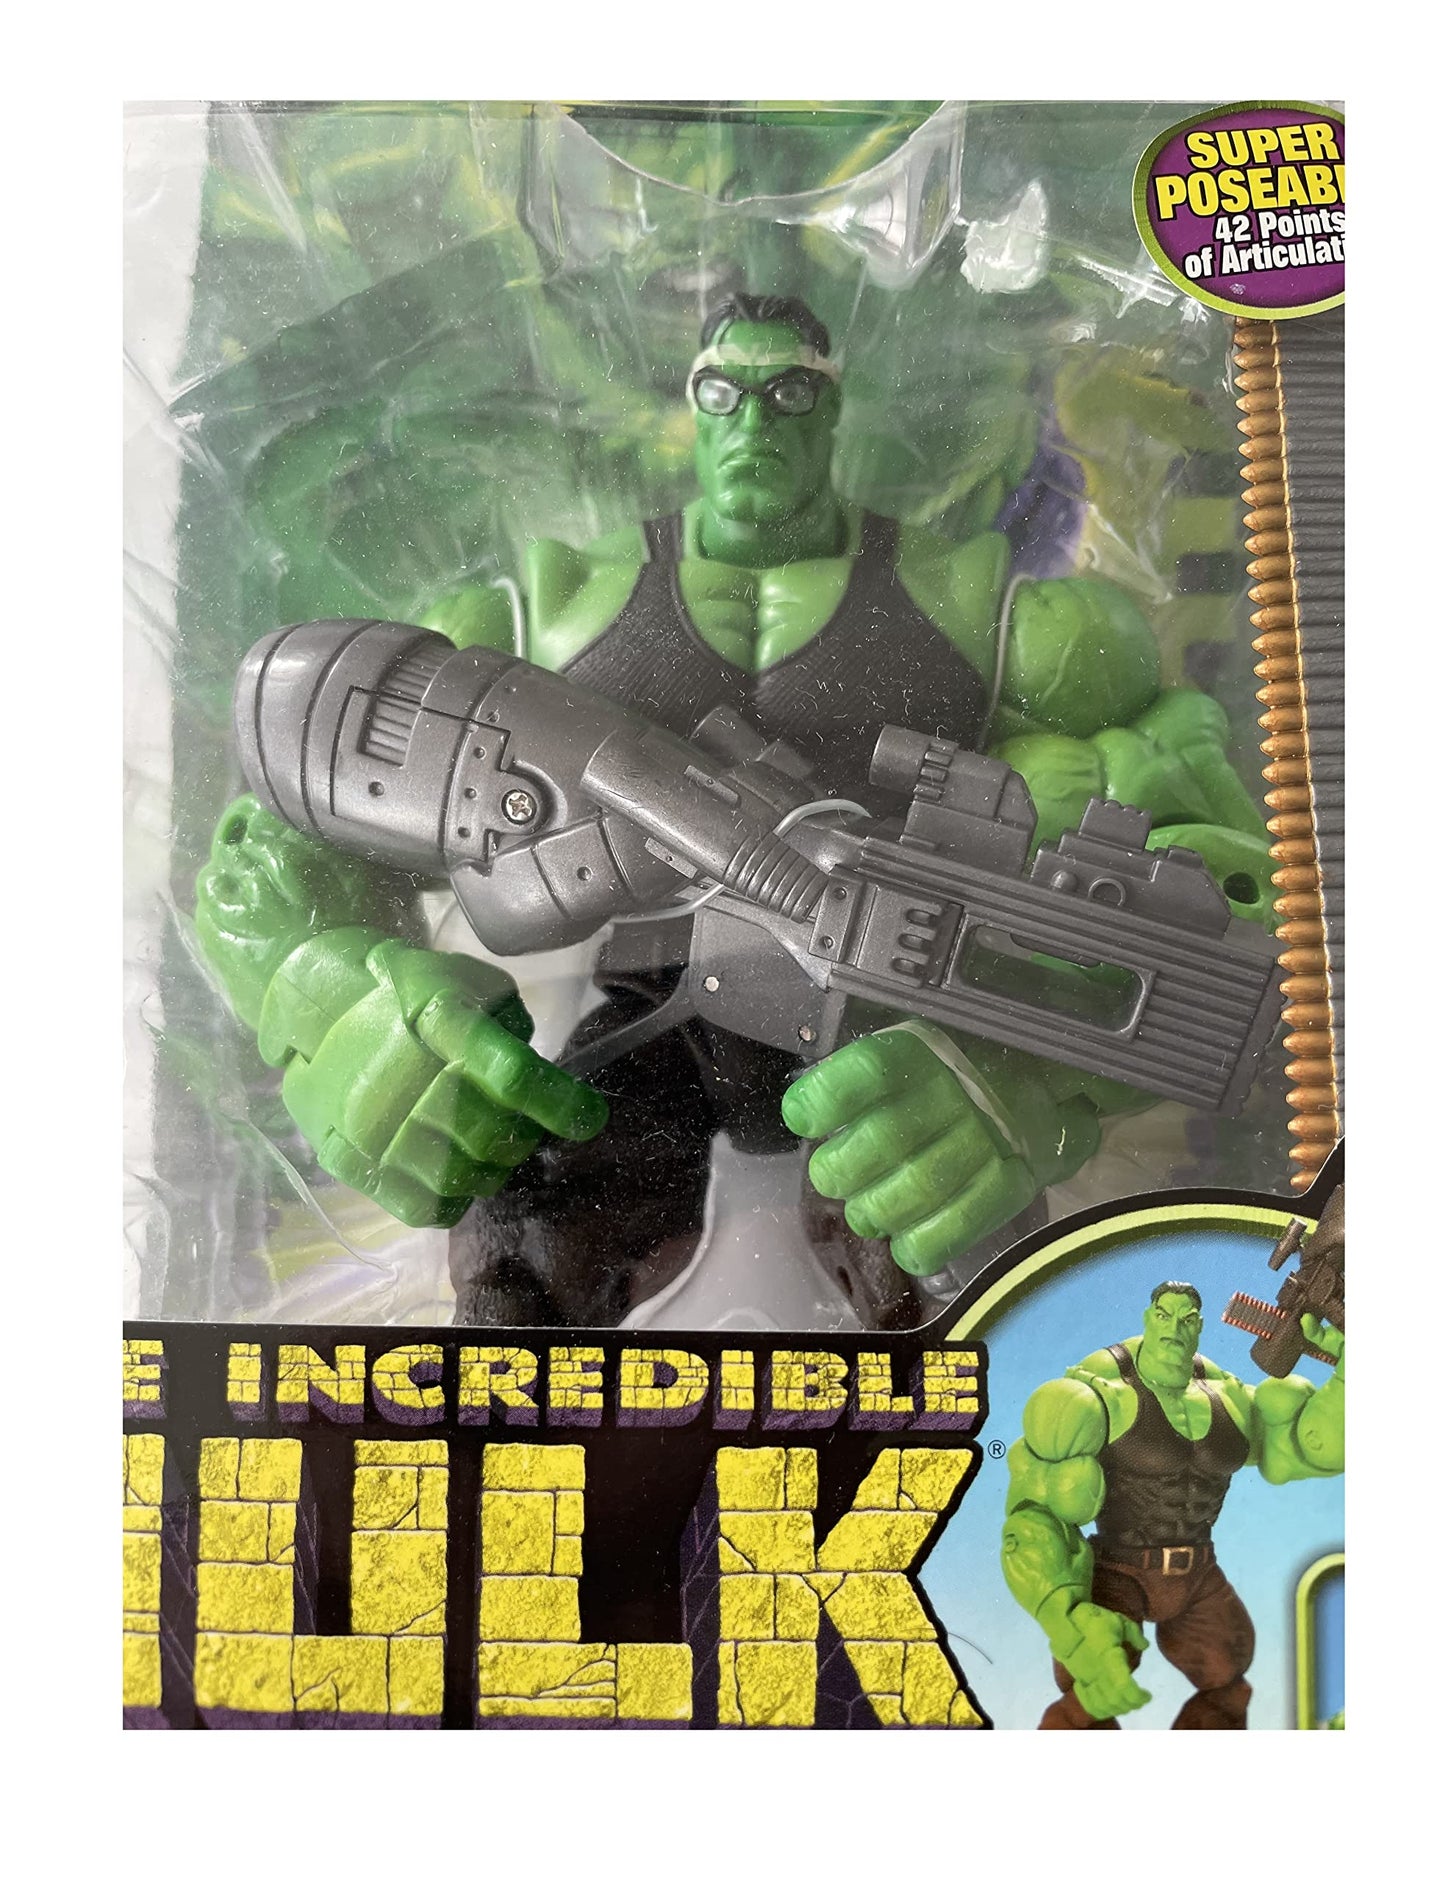 Vintage 2004 Marvel The Incredible Hulk - Smart Hulk Highly Detailed Poseable Action Figure - Brand New Factory Sealed Shop Stock Room Find